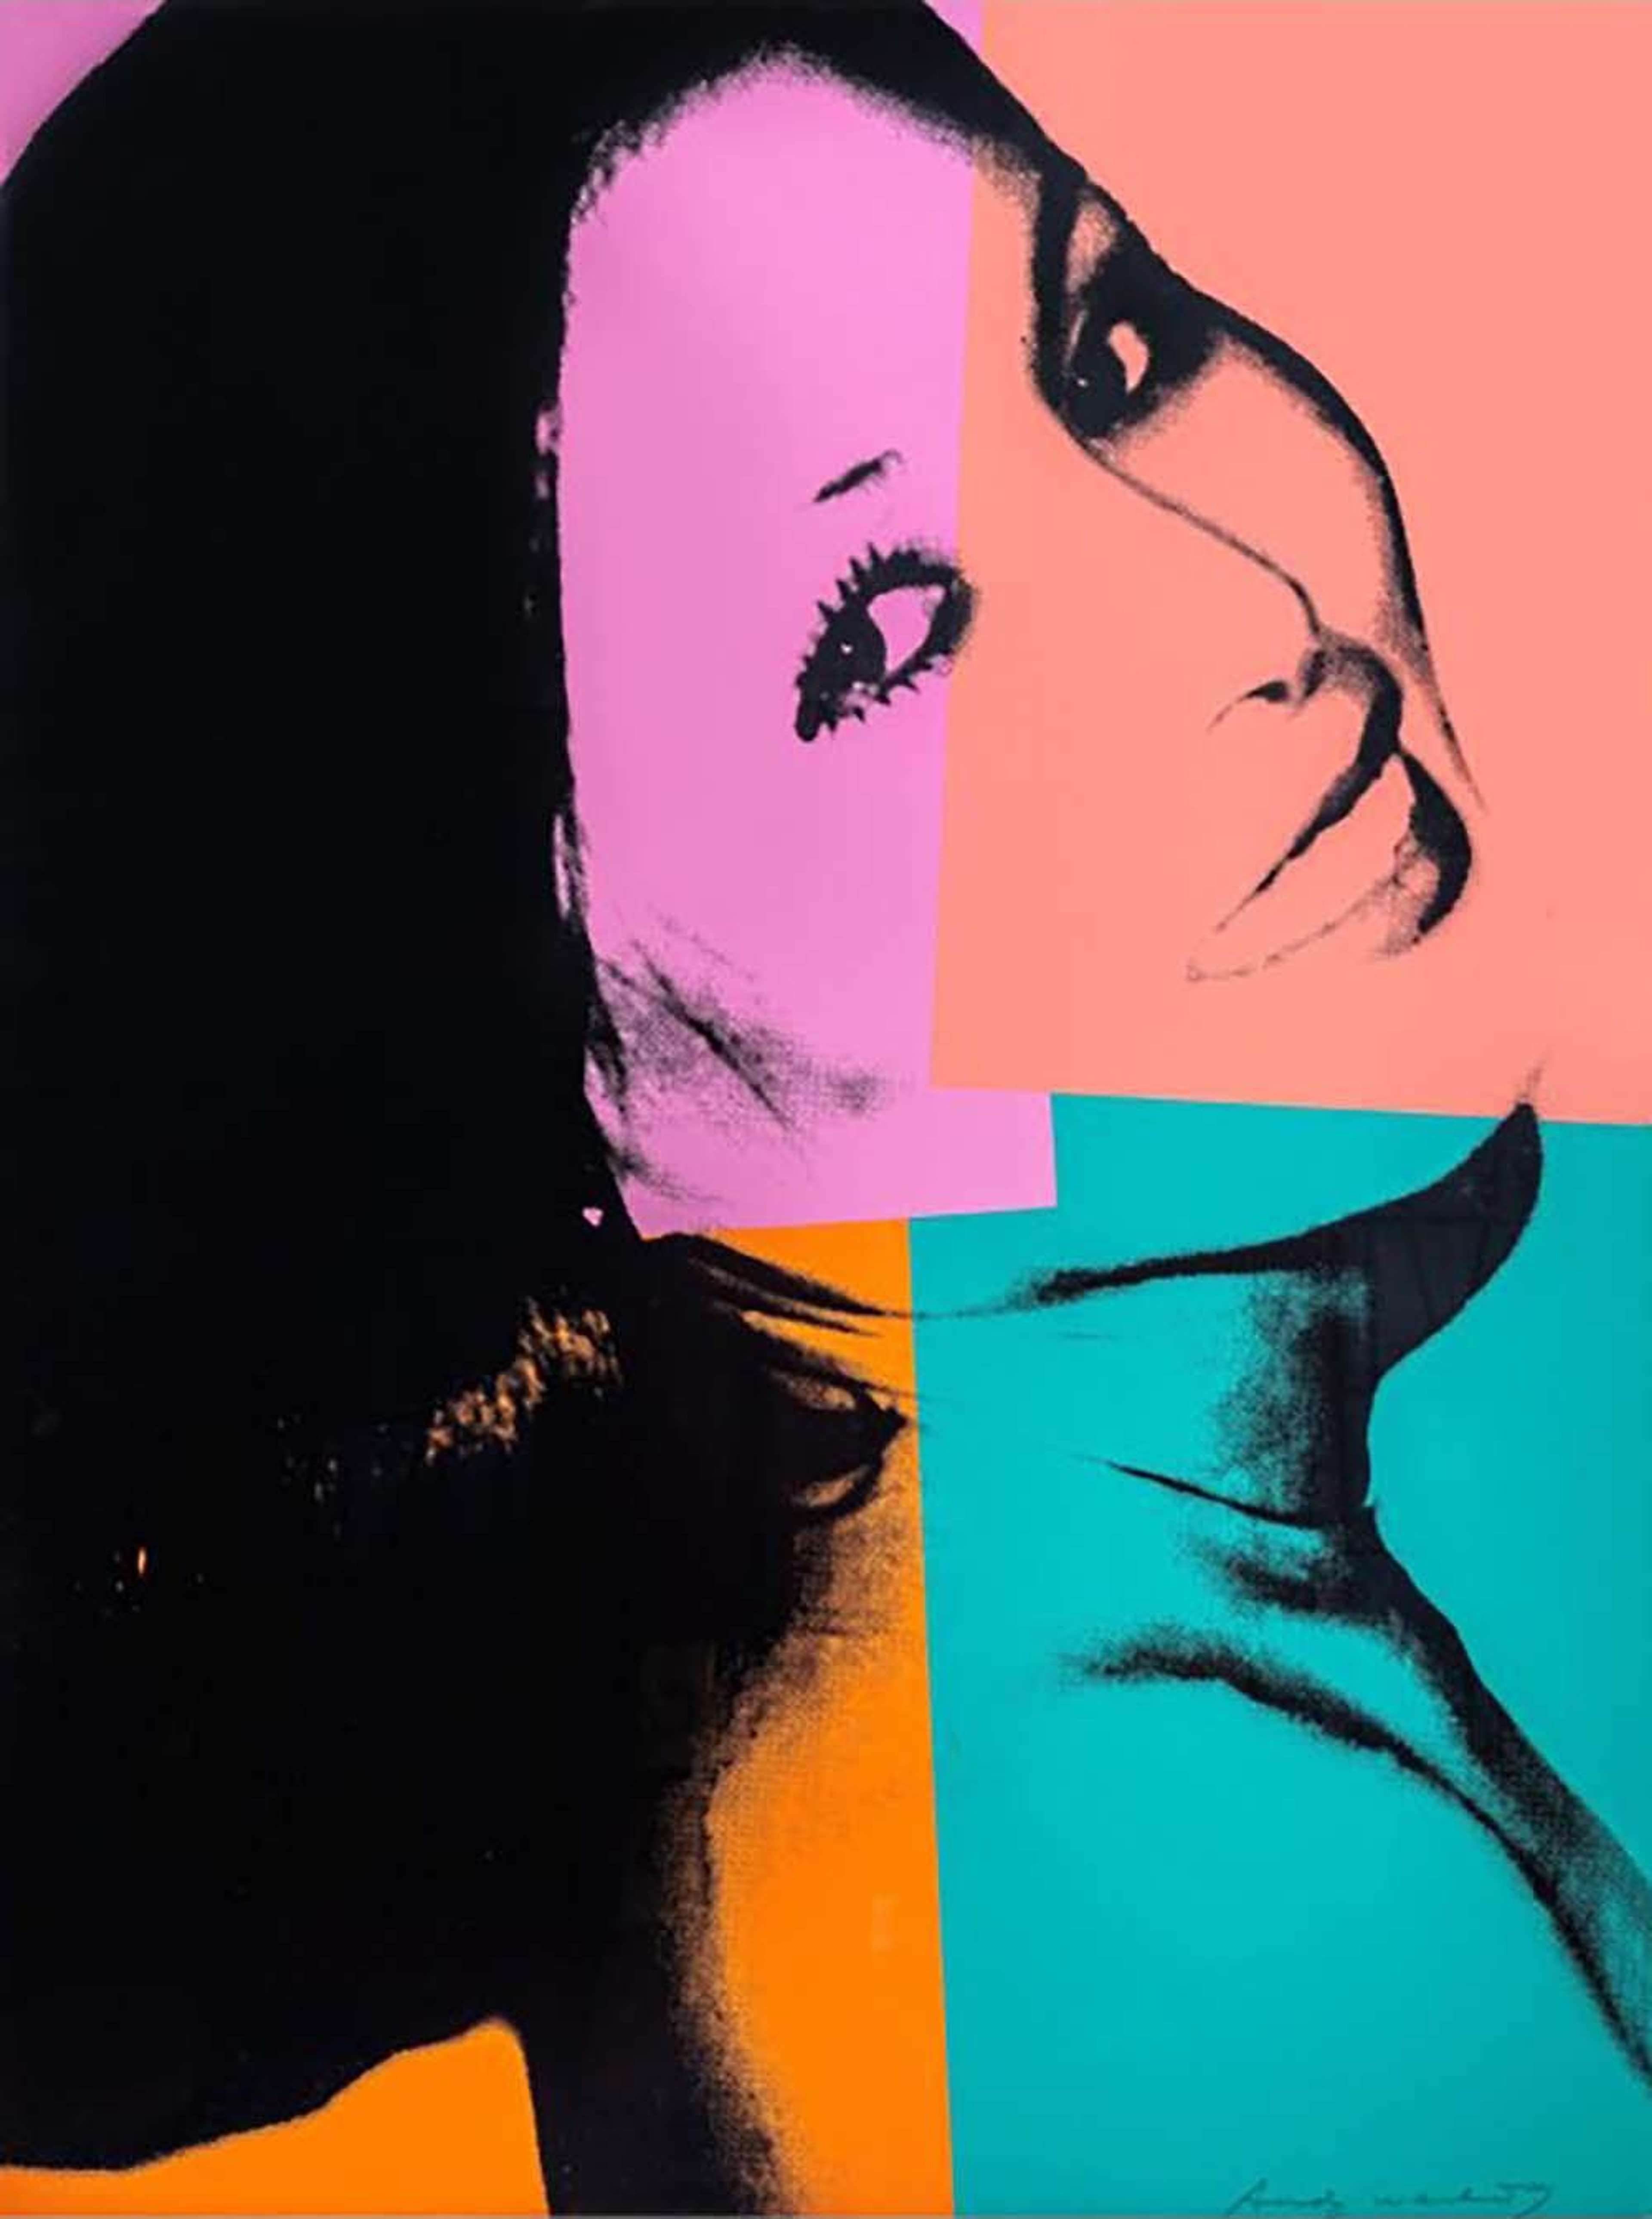 An image of the print Sachiko by Andy Warhol, which depicts Sachiko Goodman, one of New York’s top real estate brokers and art collectors. Sachiko is depicted side-on, gazing charmingly at the viewer of the print, as she tilts her head back in a flirty and carefree manner.